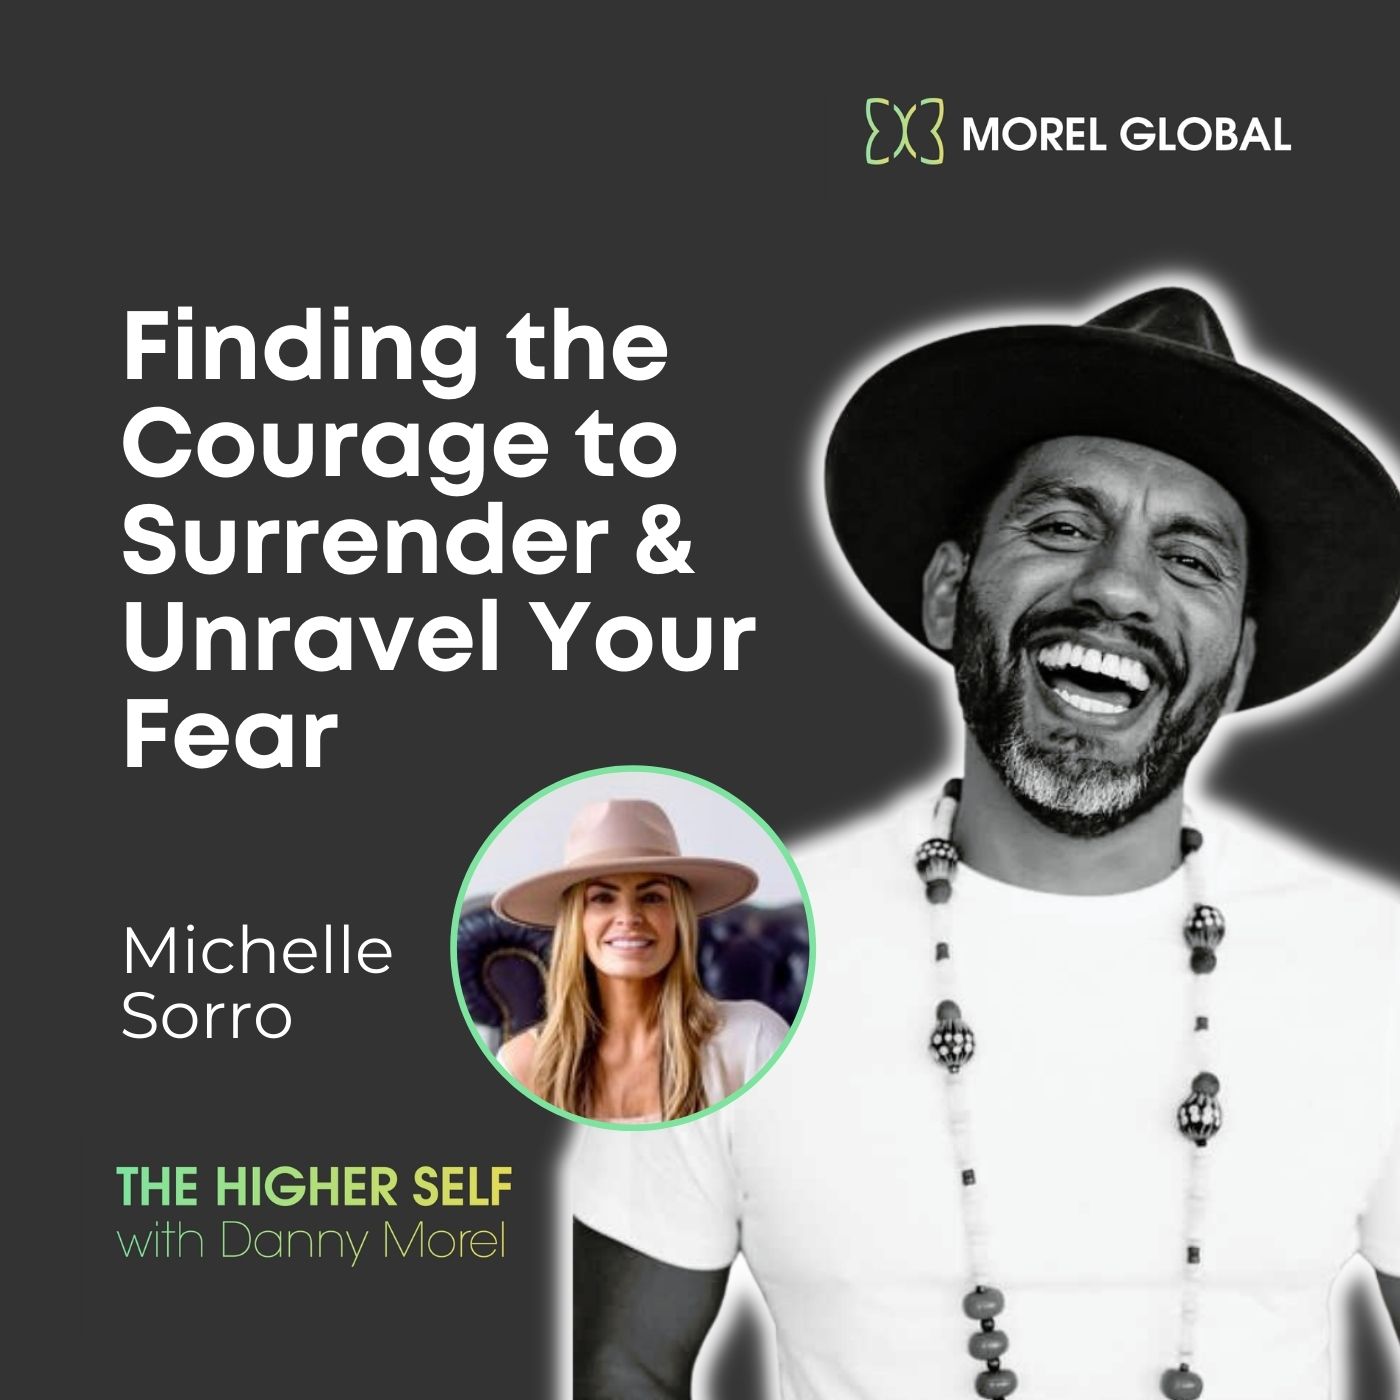 040 Michelle Sorro - Finding the Courage to Surrender & Unravel Your Fear Image